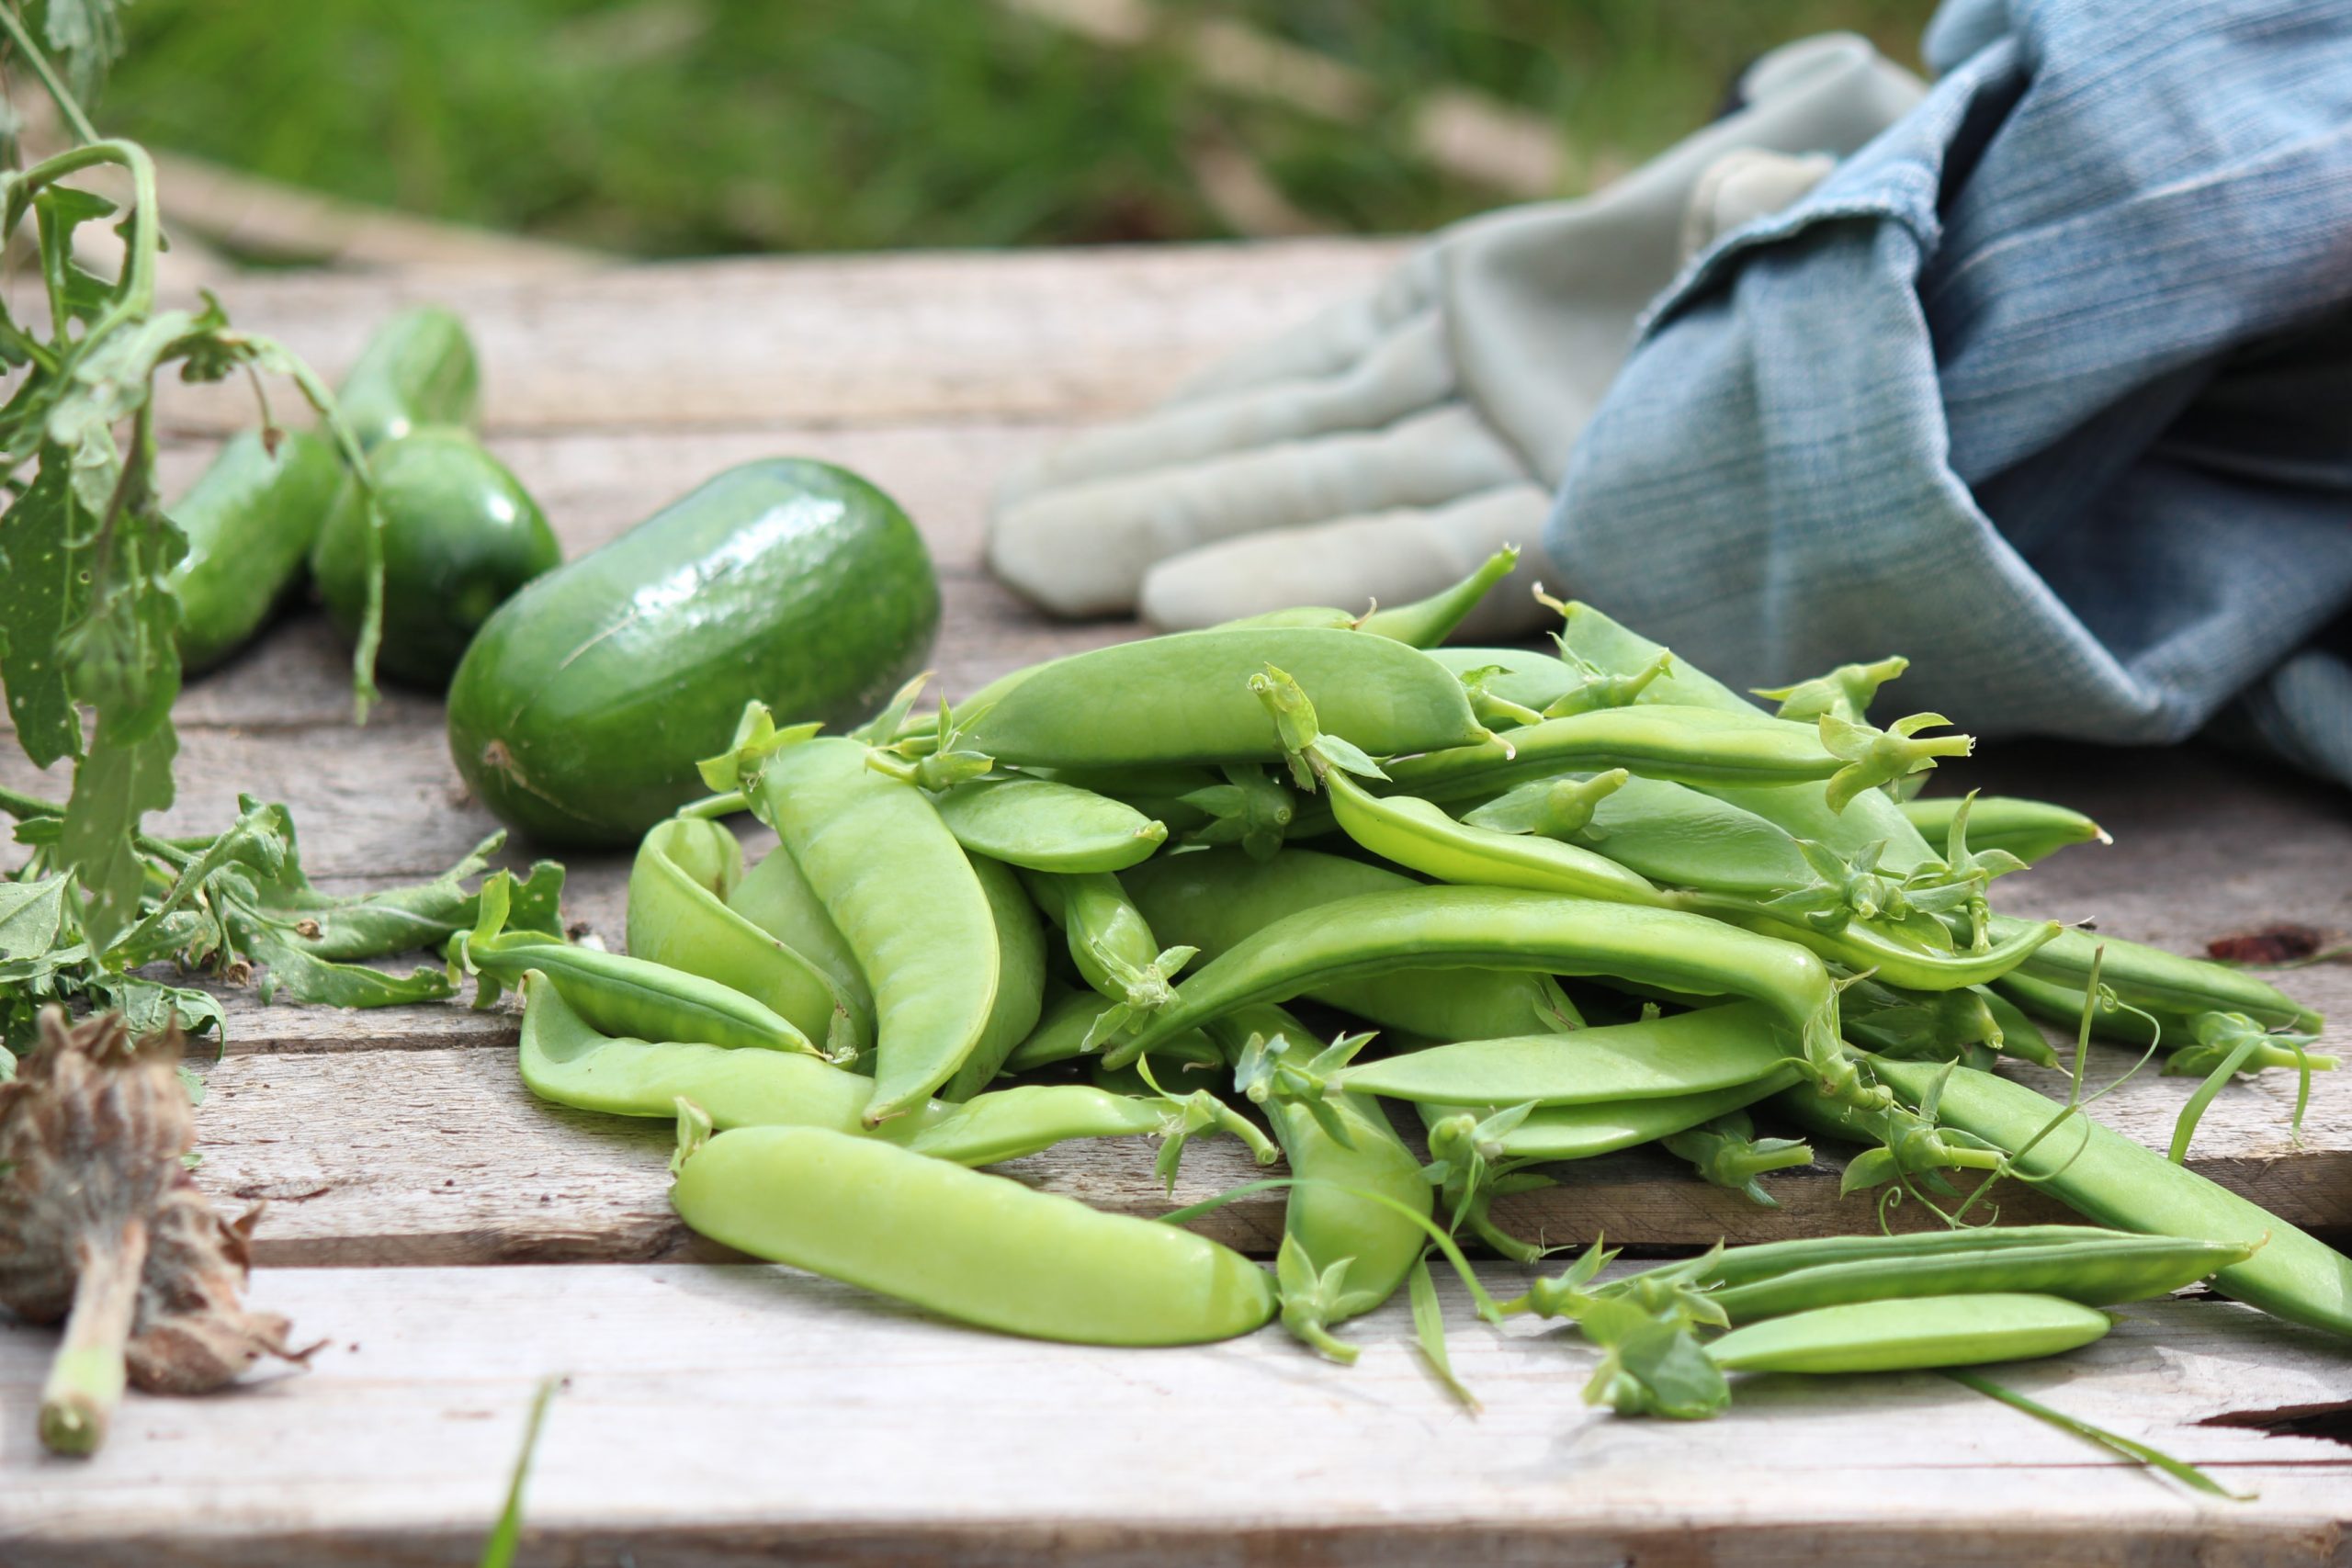 What Climate Do Snow Peas Grow In?